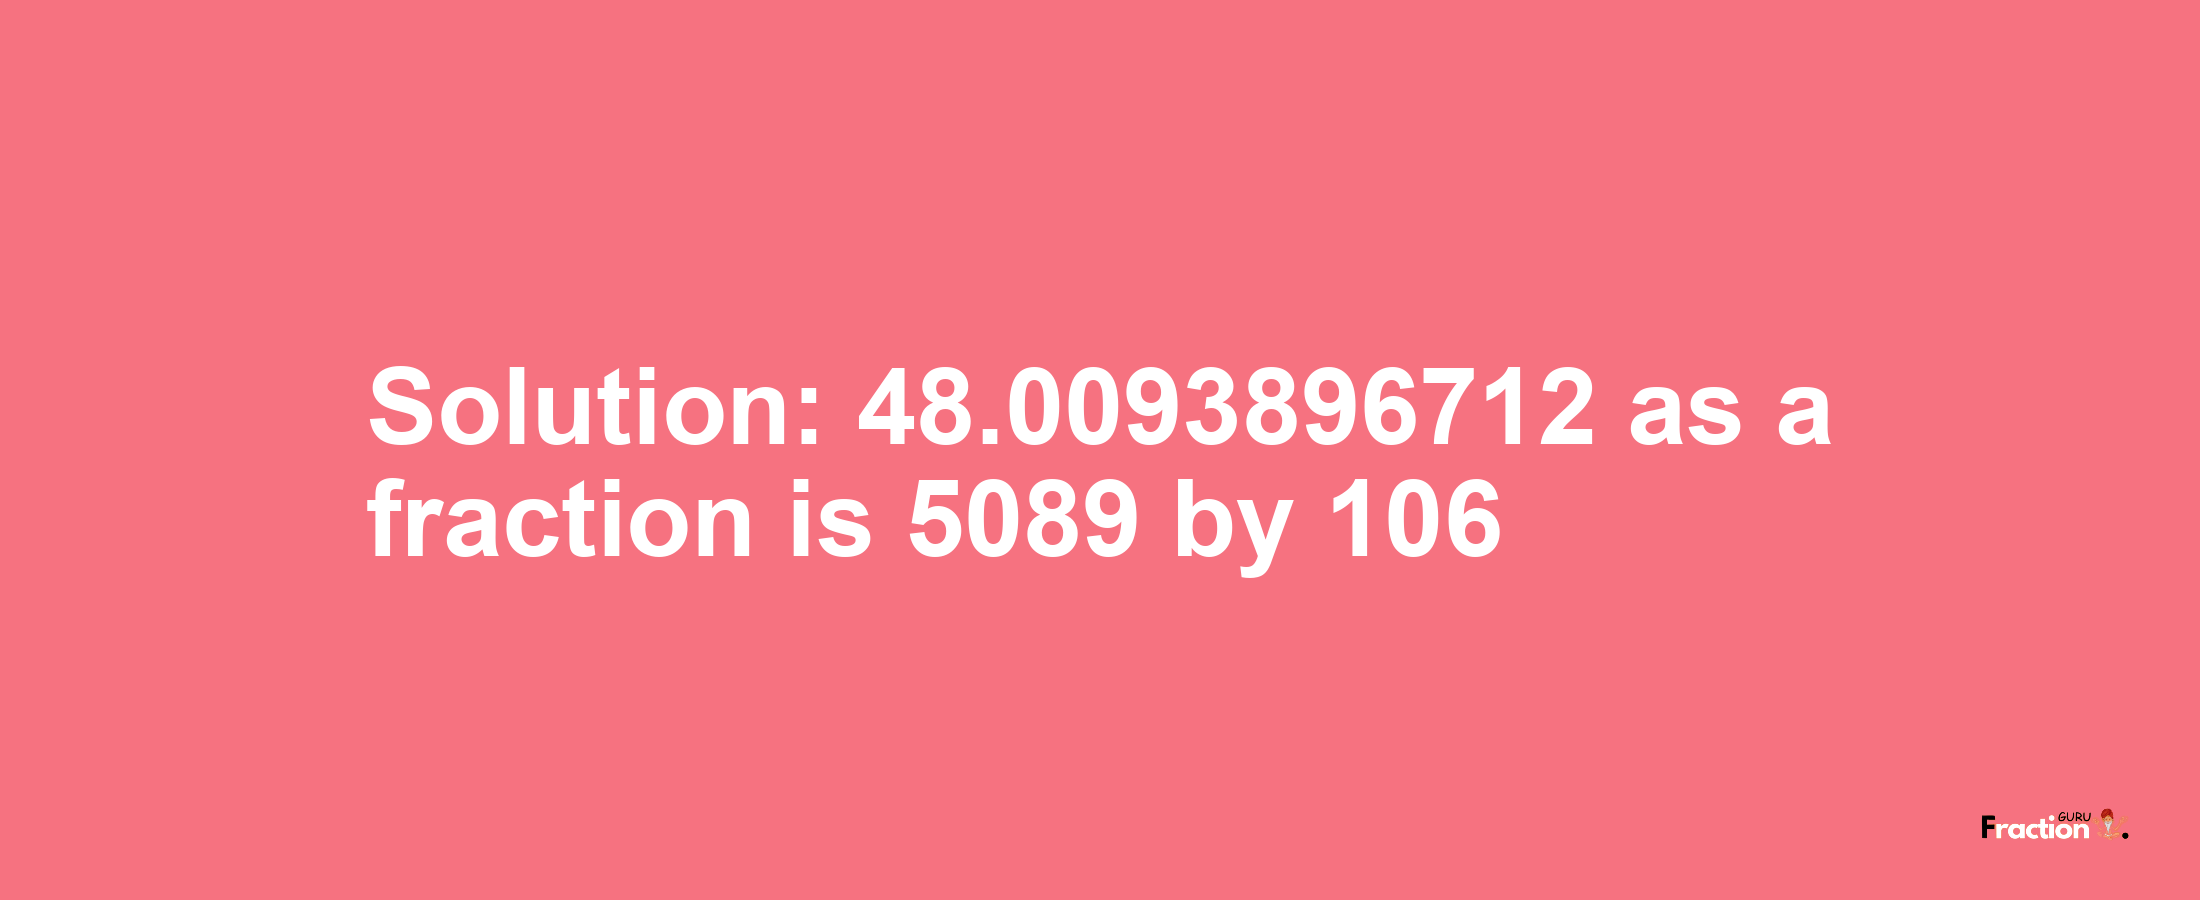 Solution:48.0093896712 as a fraction is 5089/106